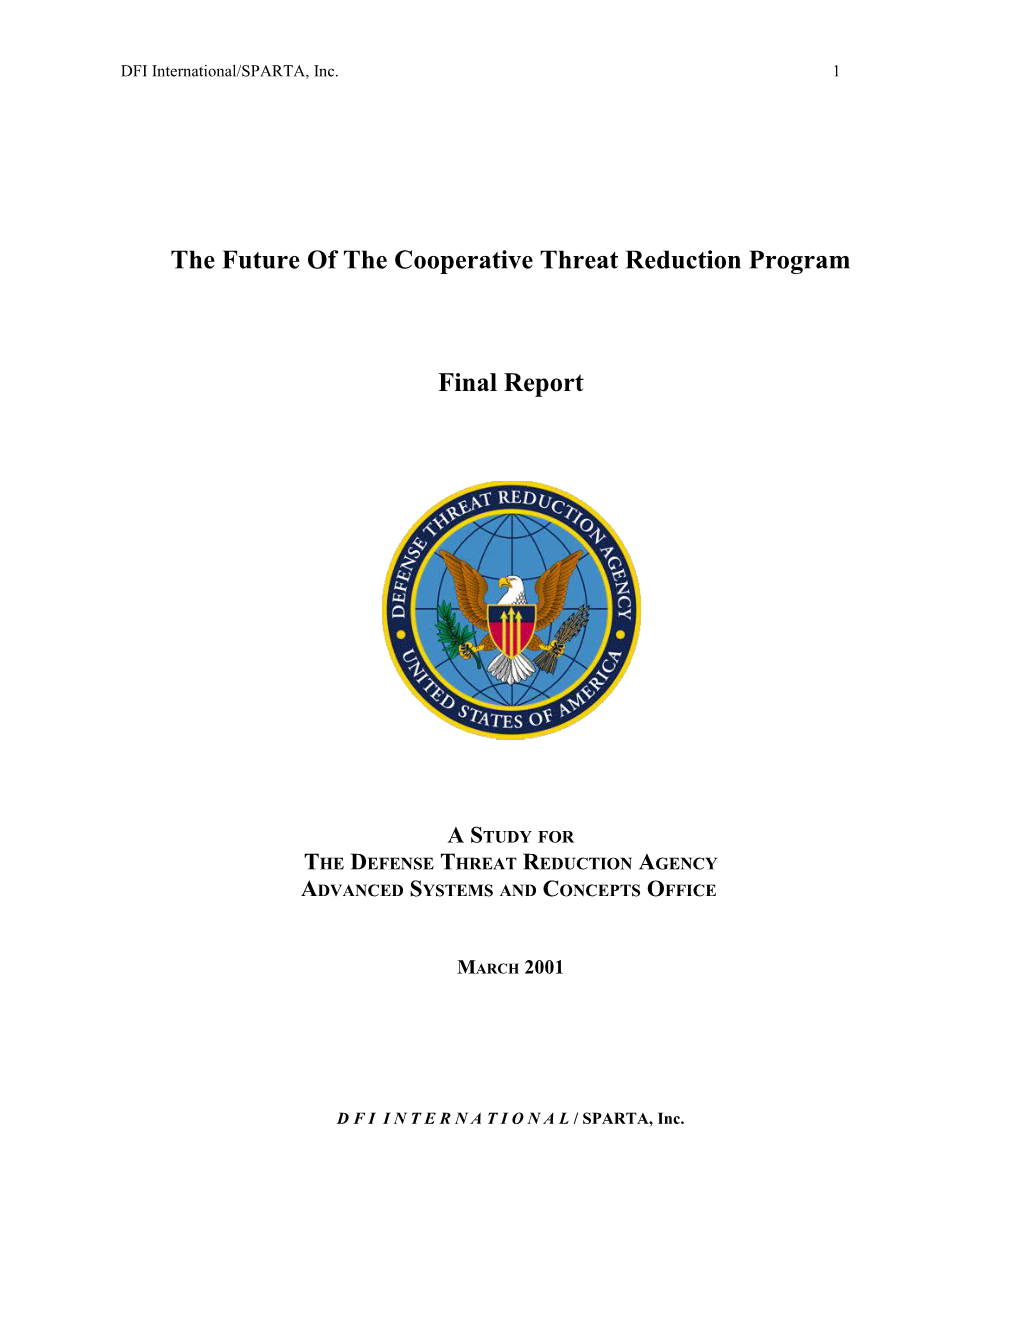 The Future of the Cooperative Threat Reduction Program